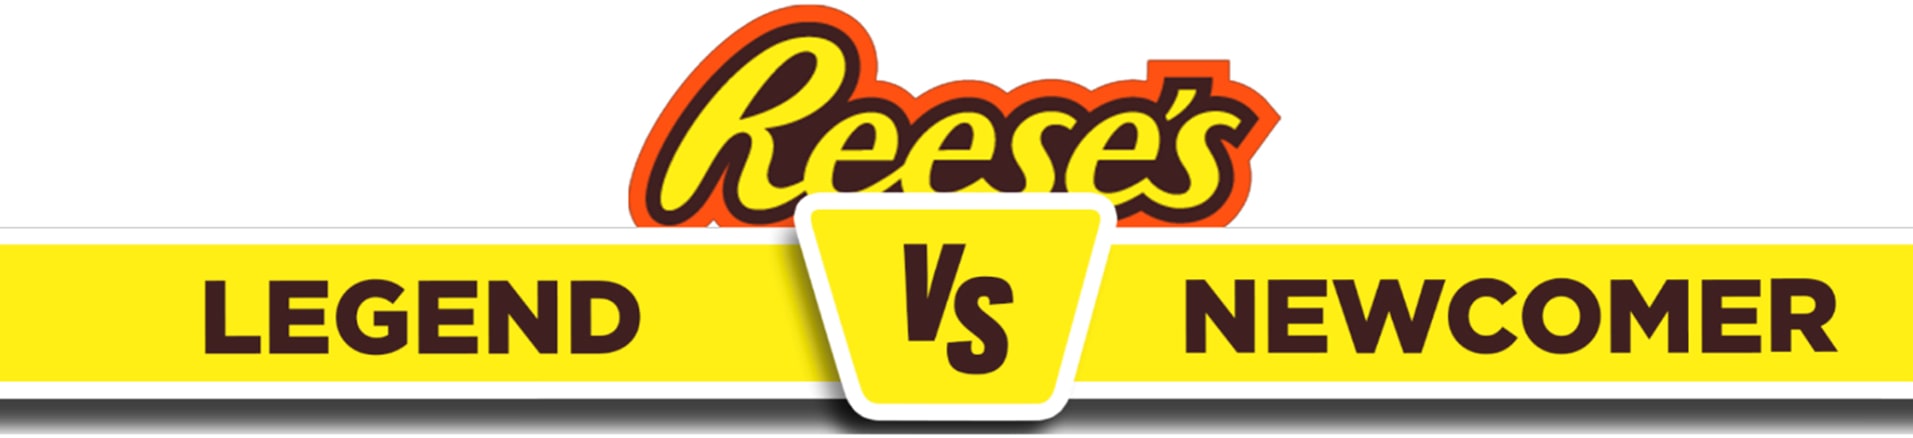 Reese's Legend vs. Newcomer